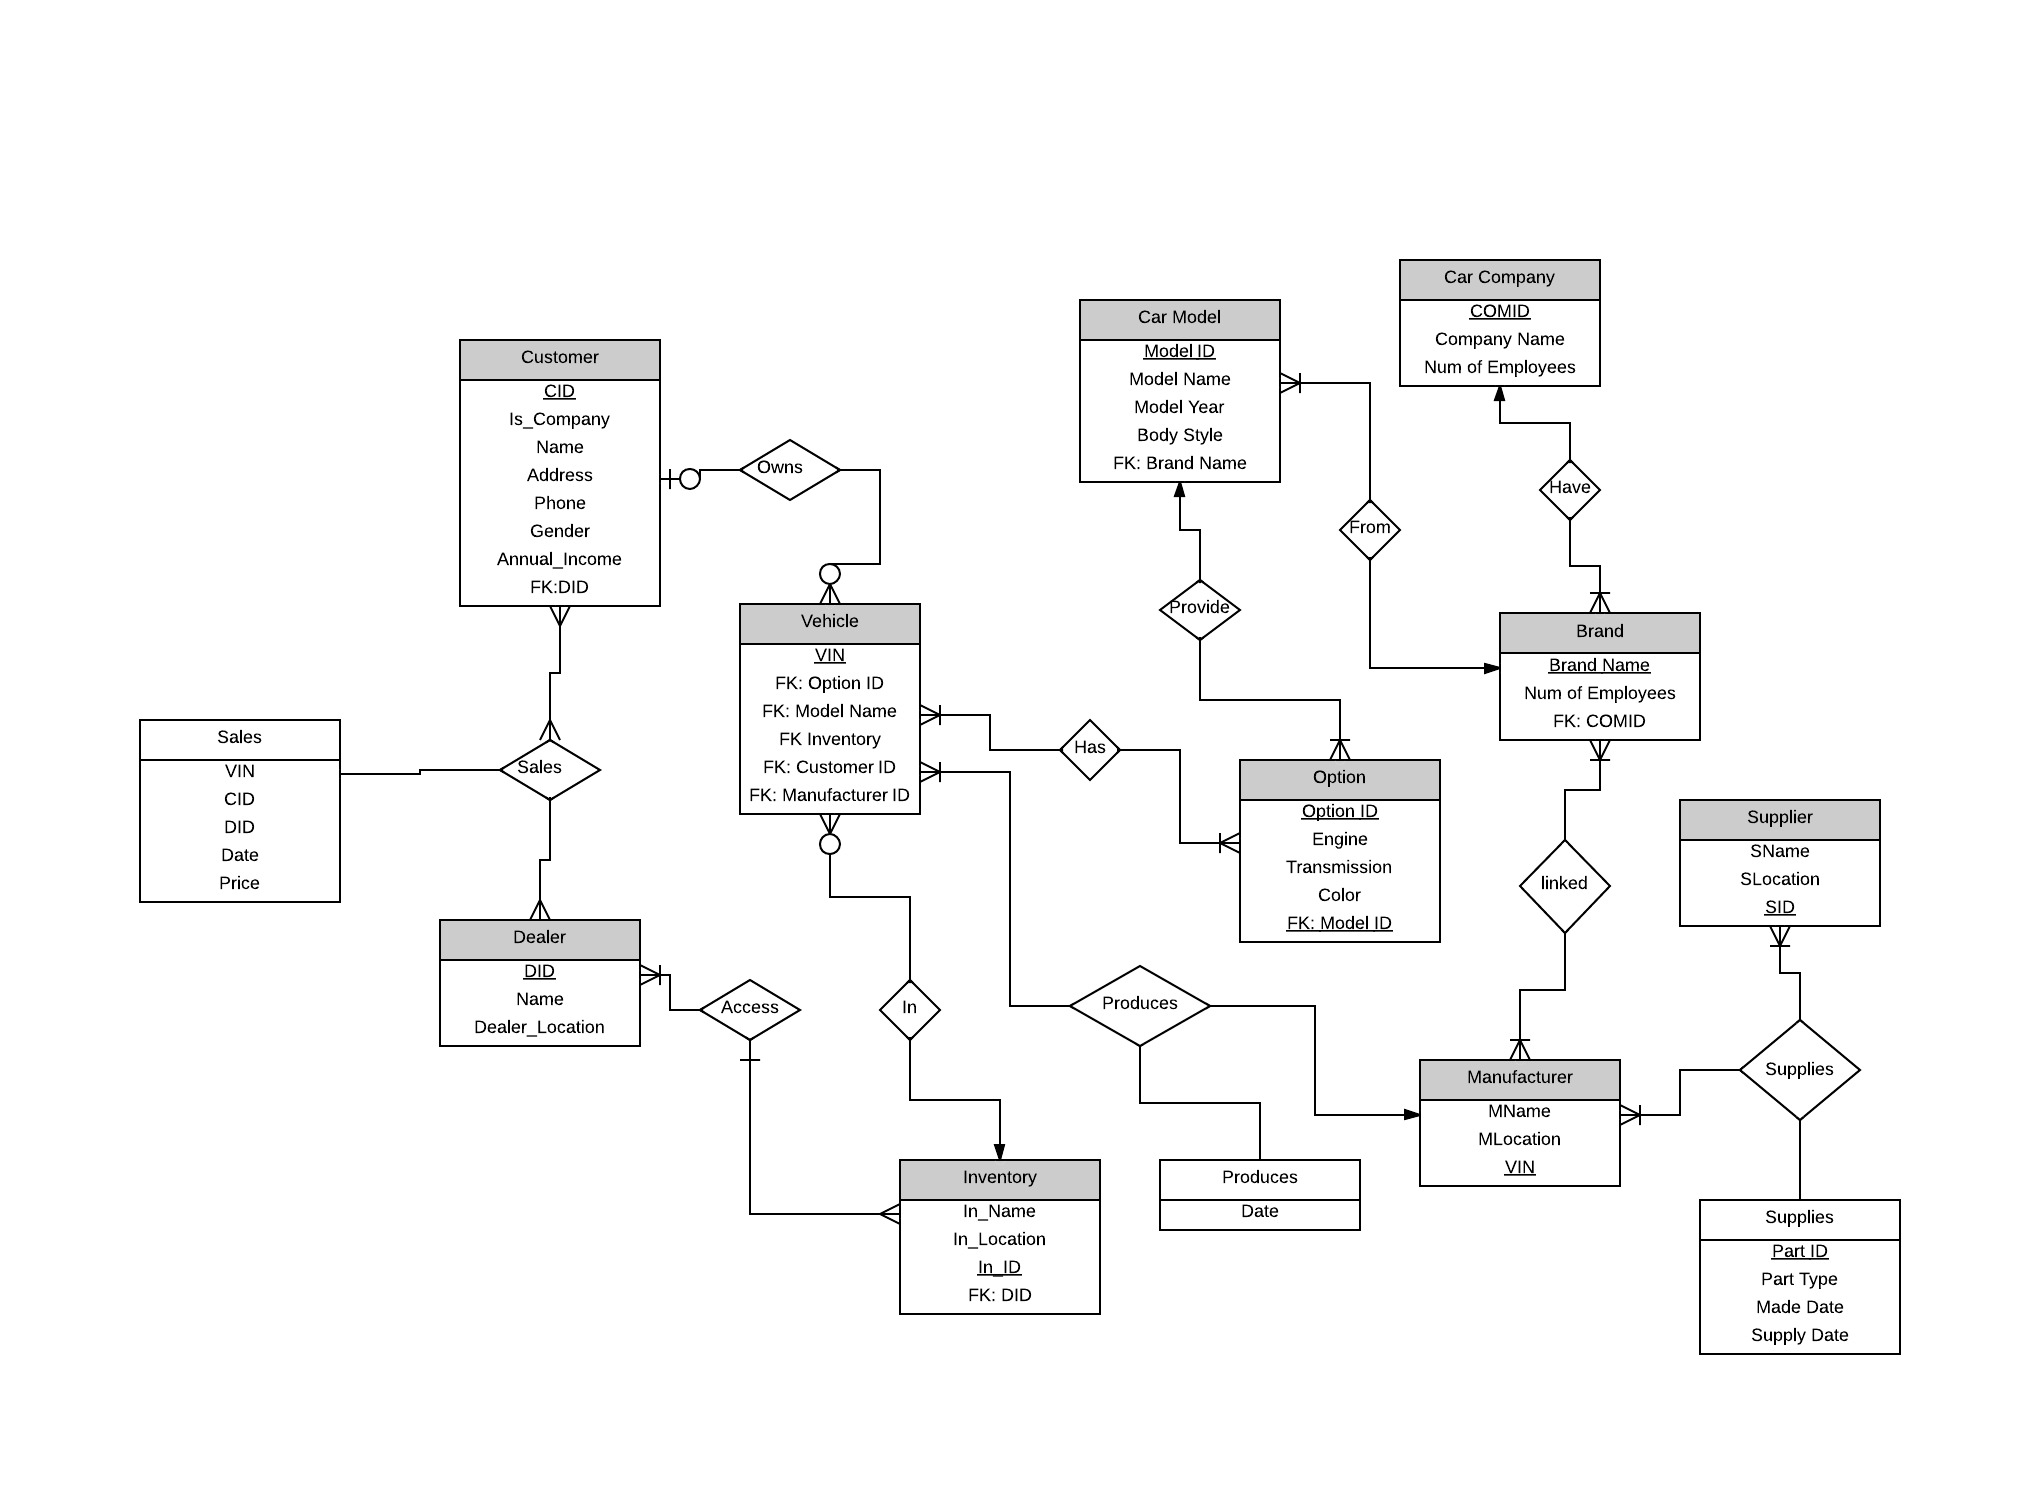 Sql Need Help On An ER Diagram For An Automobile Company Stack Overflow